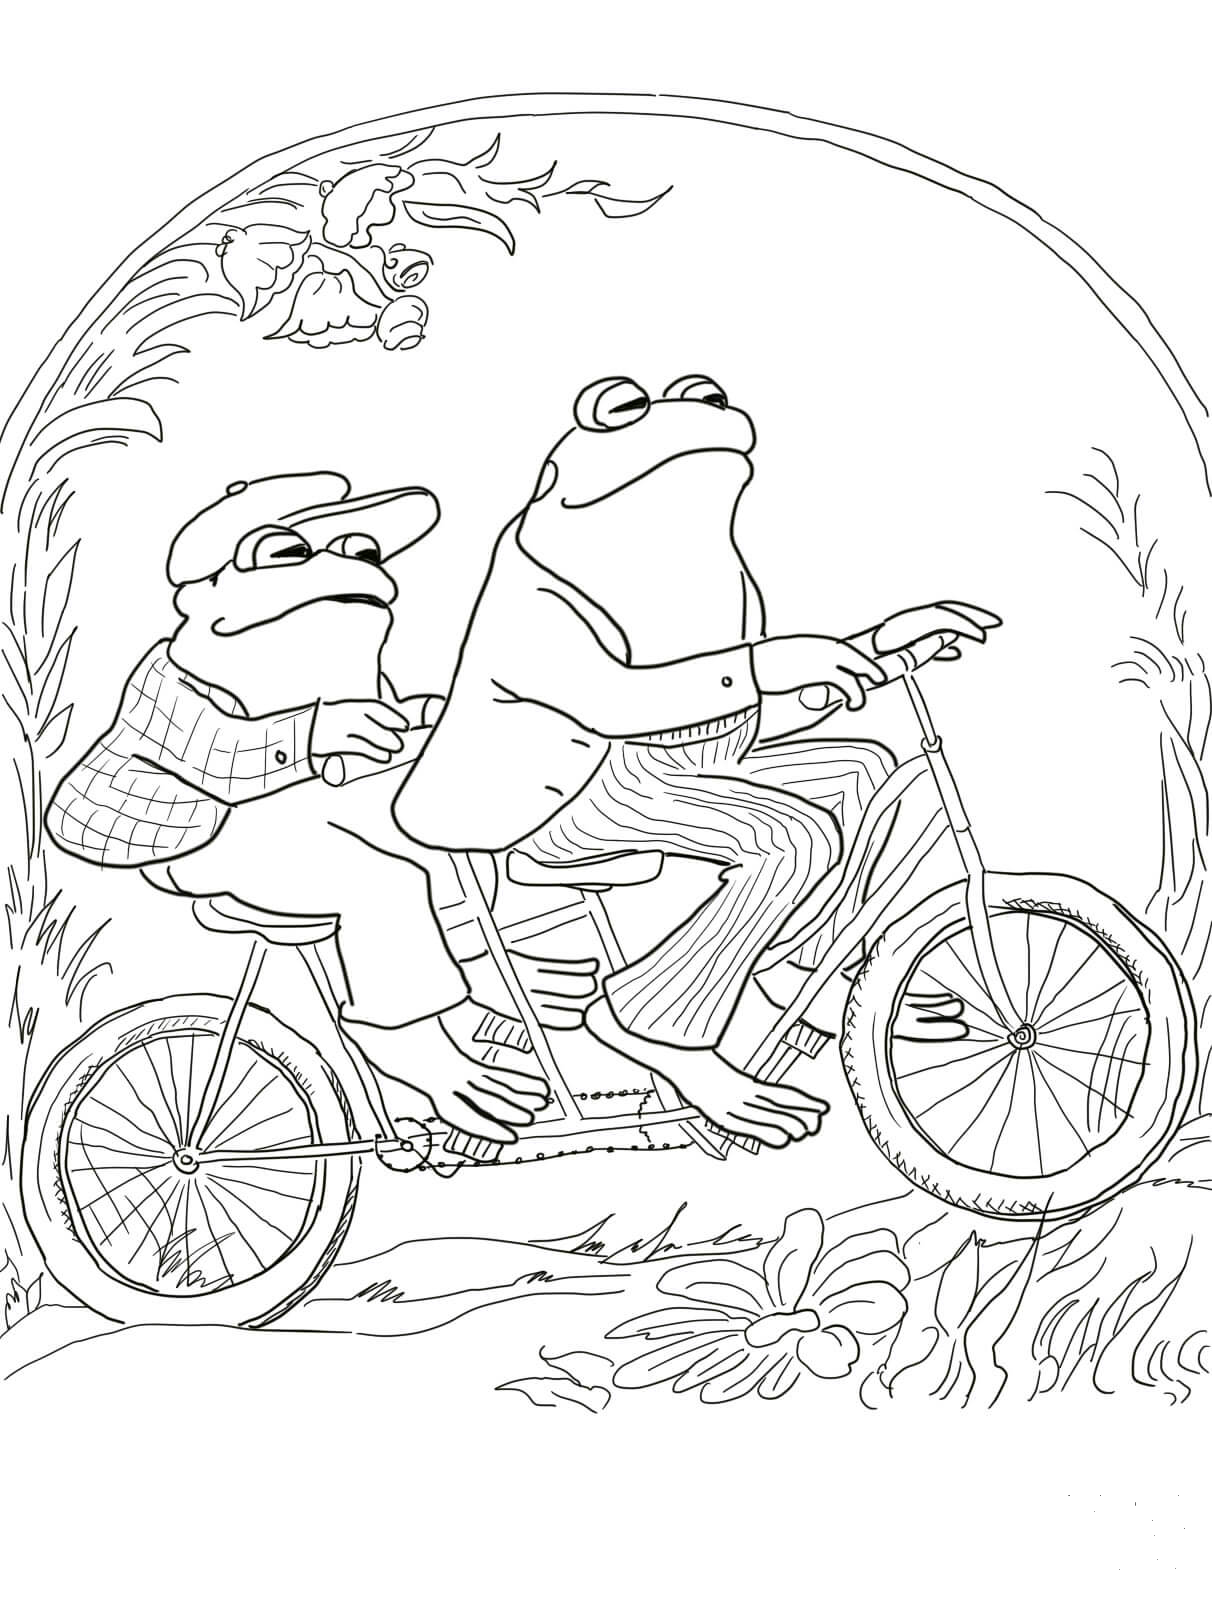 Frog and Toad Together coloring page ColouringPages